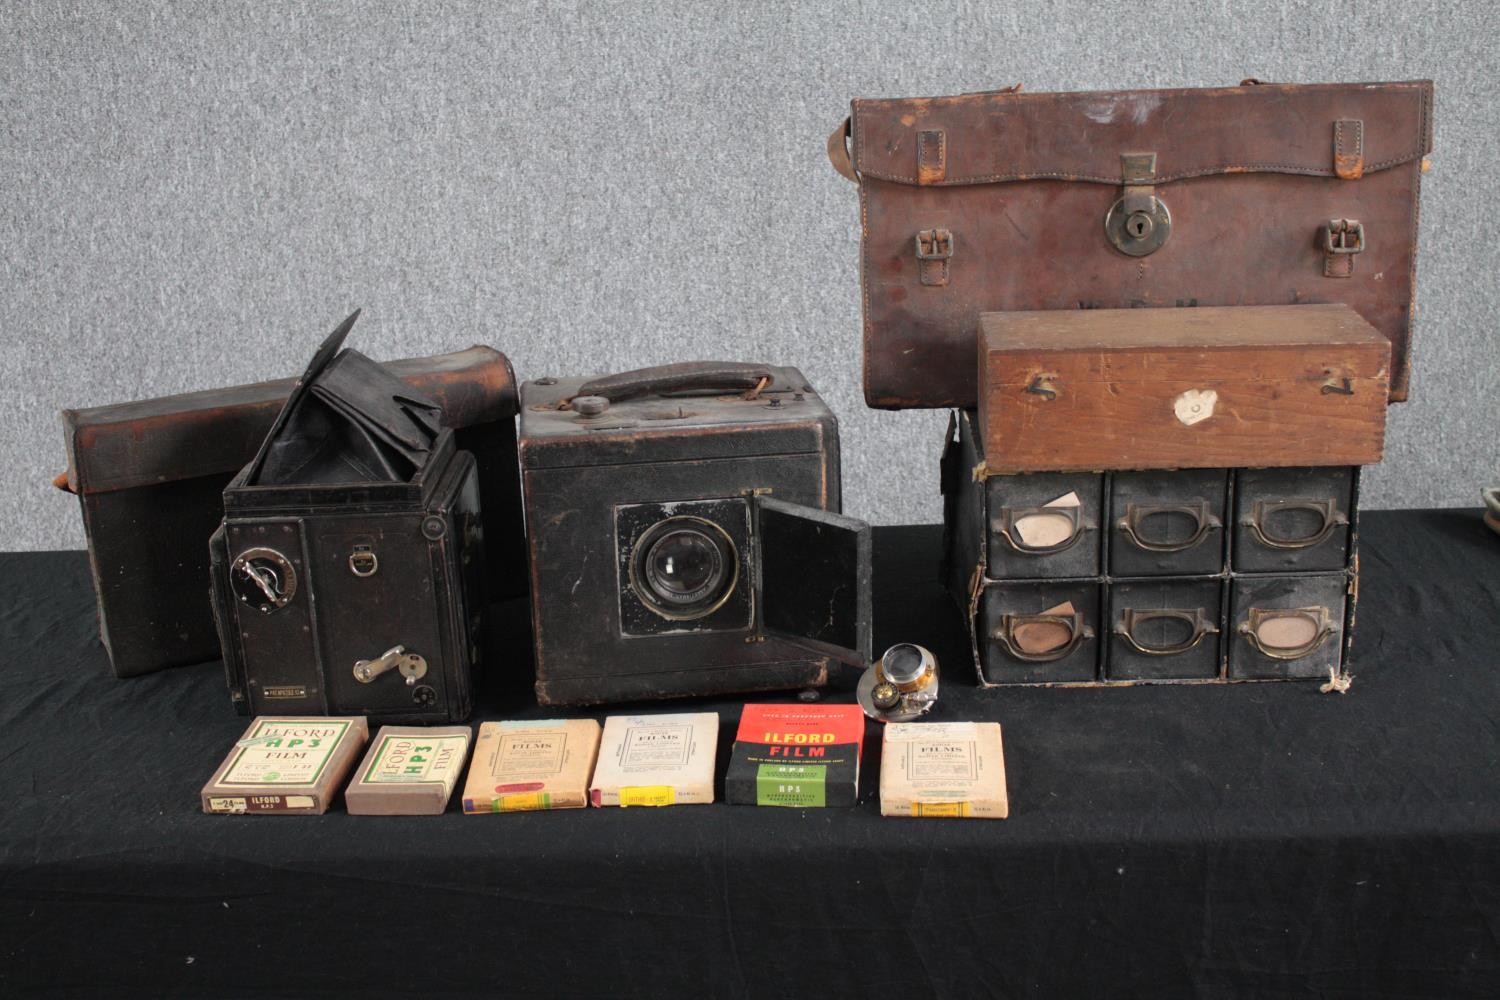 A collection of vintage plate cameras and accessories. Includes a Cooke Anastomosis lens, cases, and